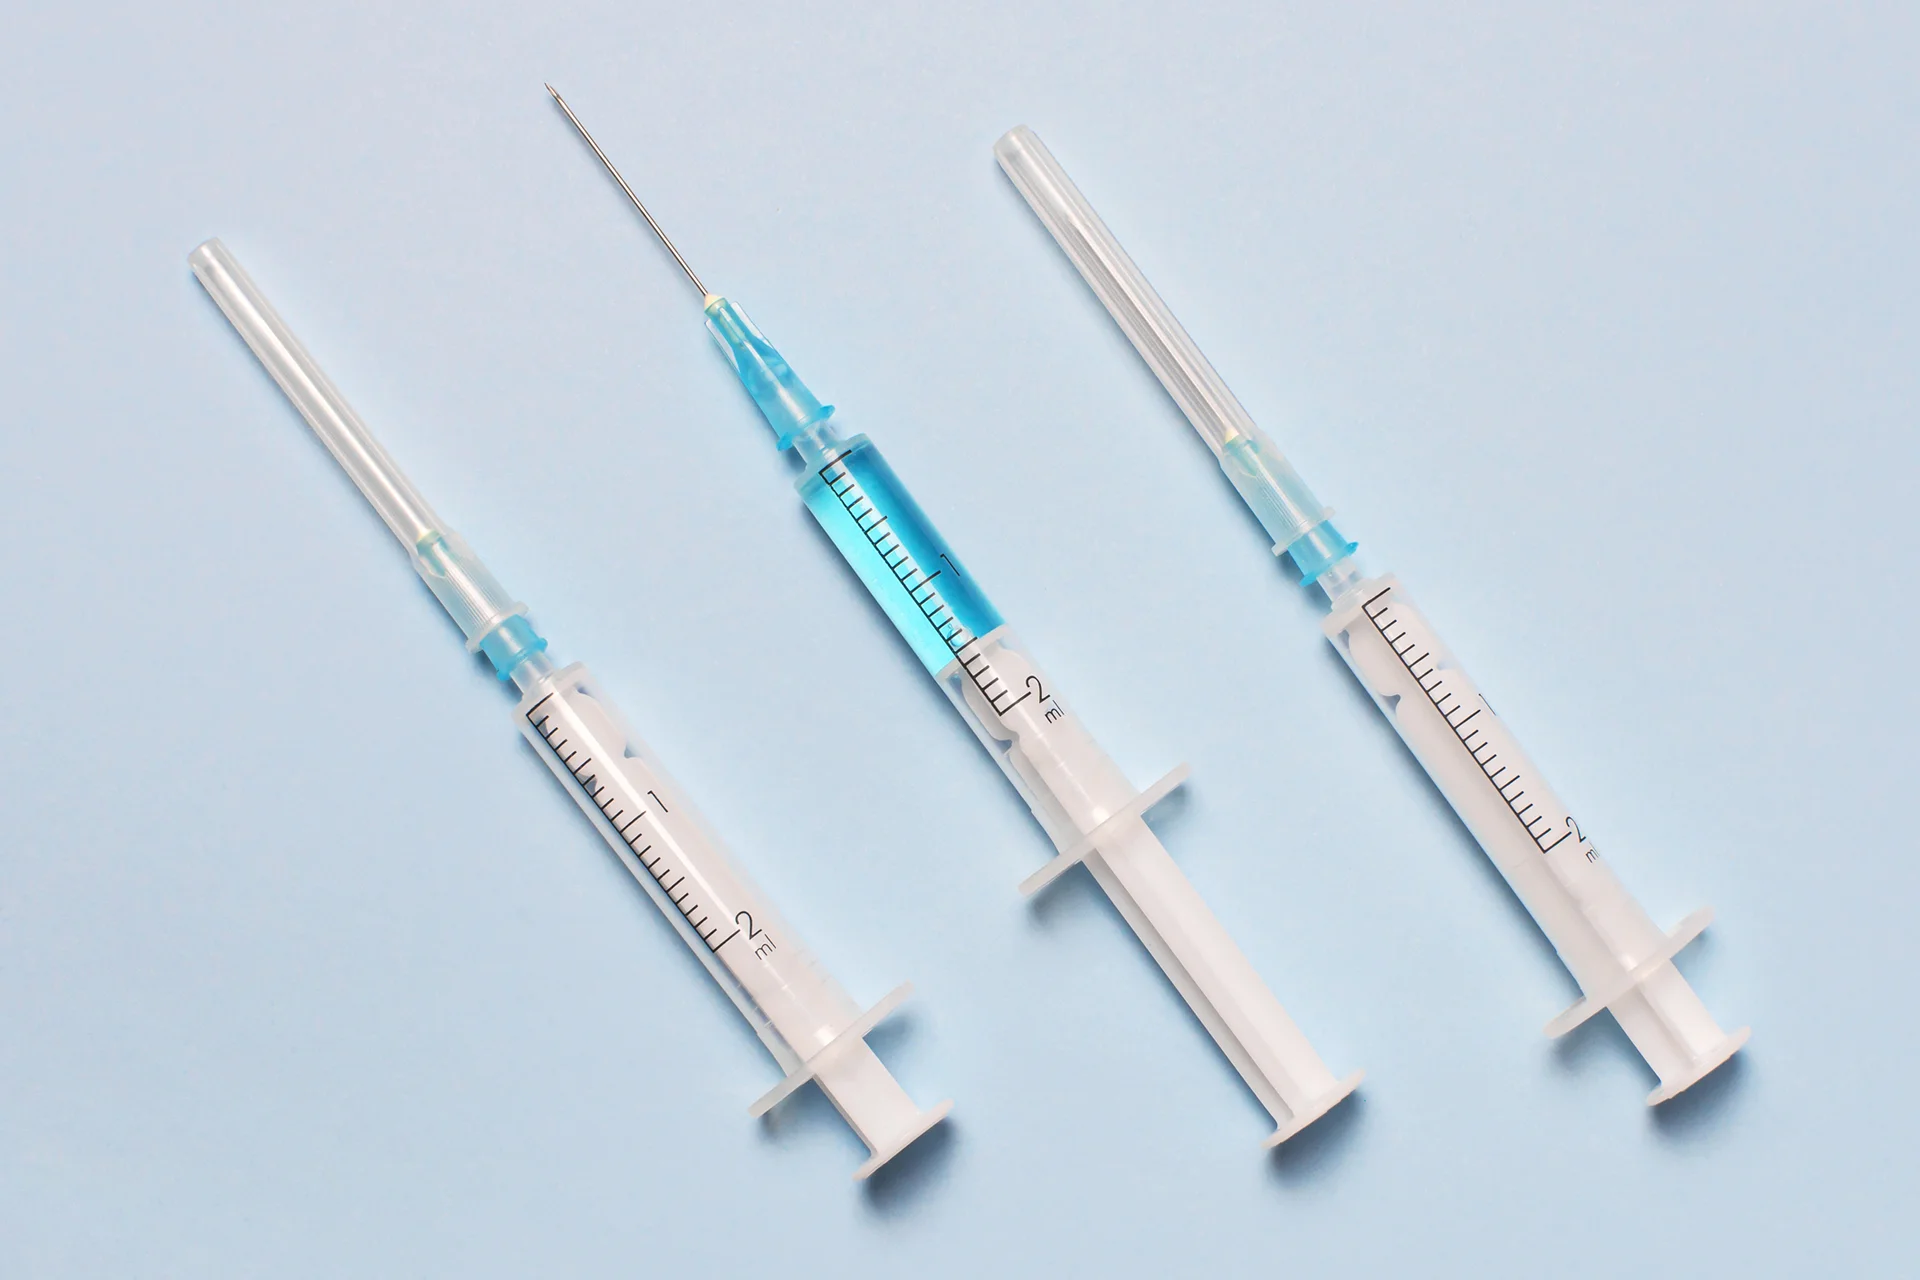 different sizes of hypodermic needles